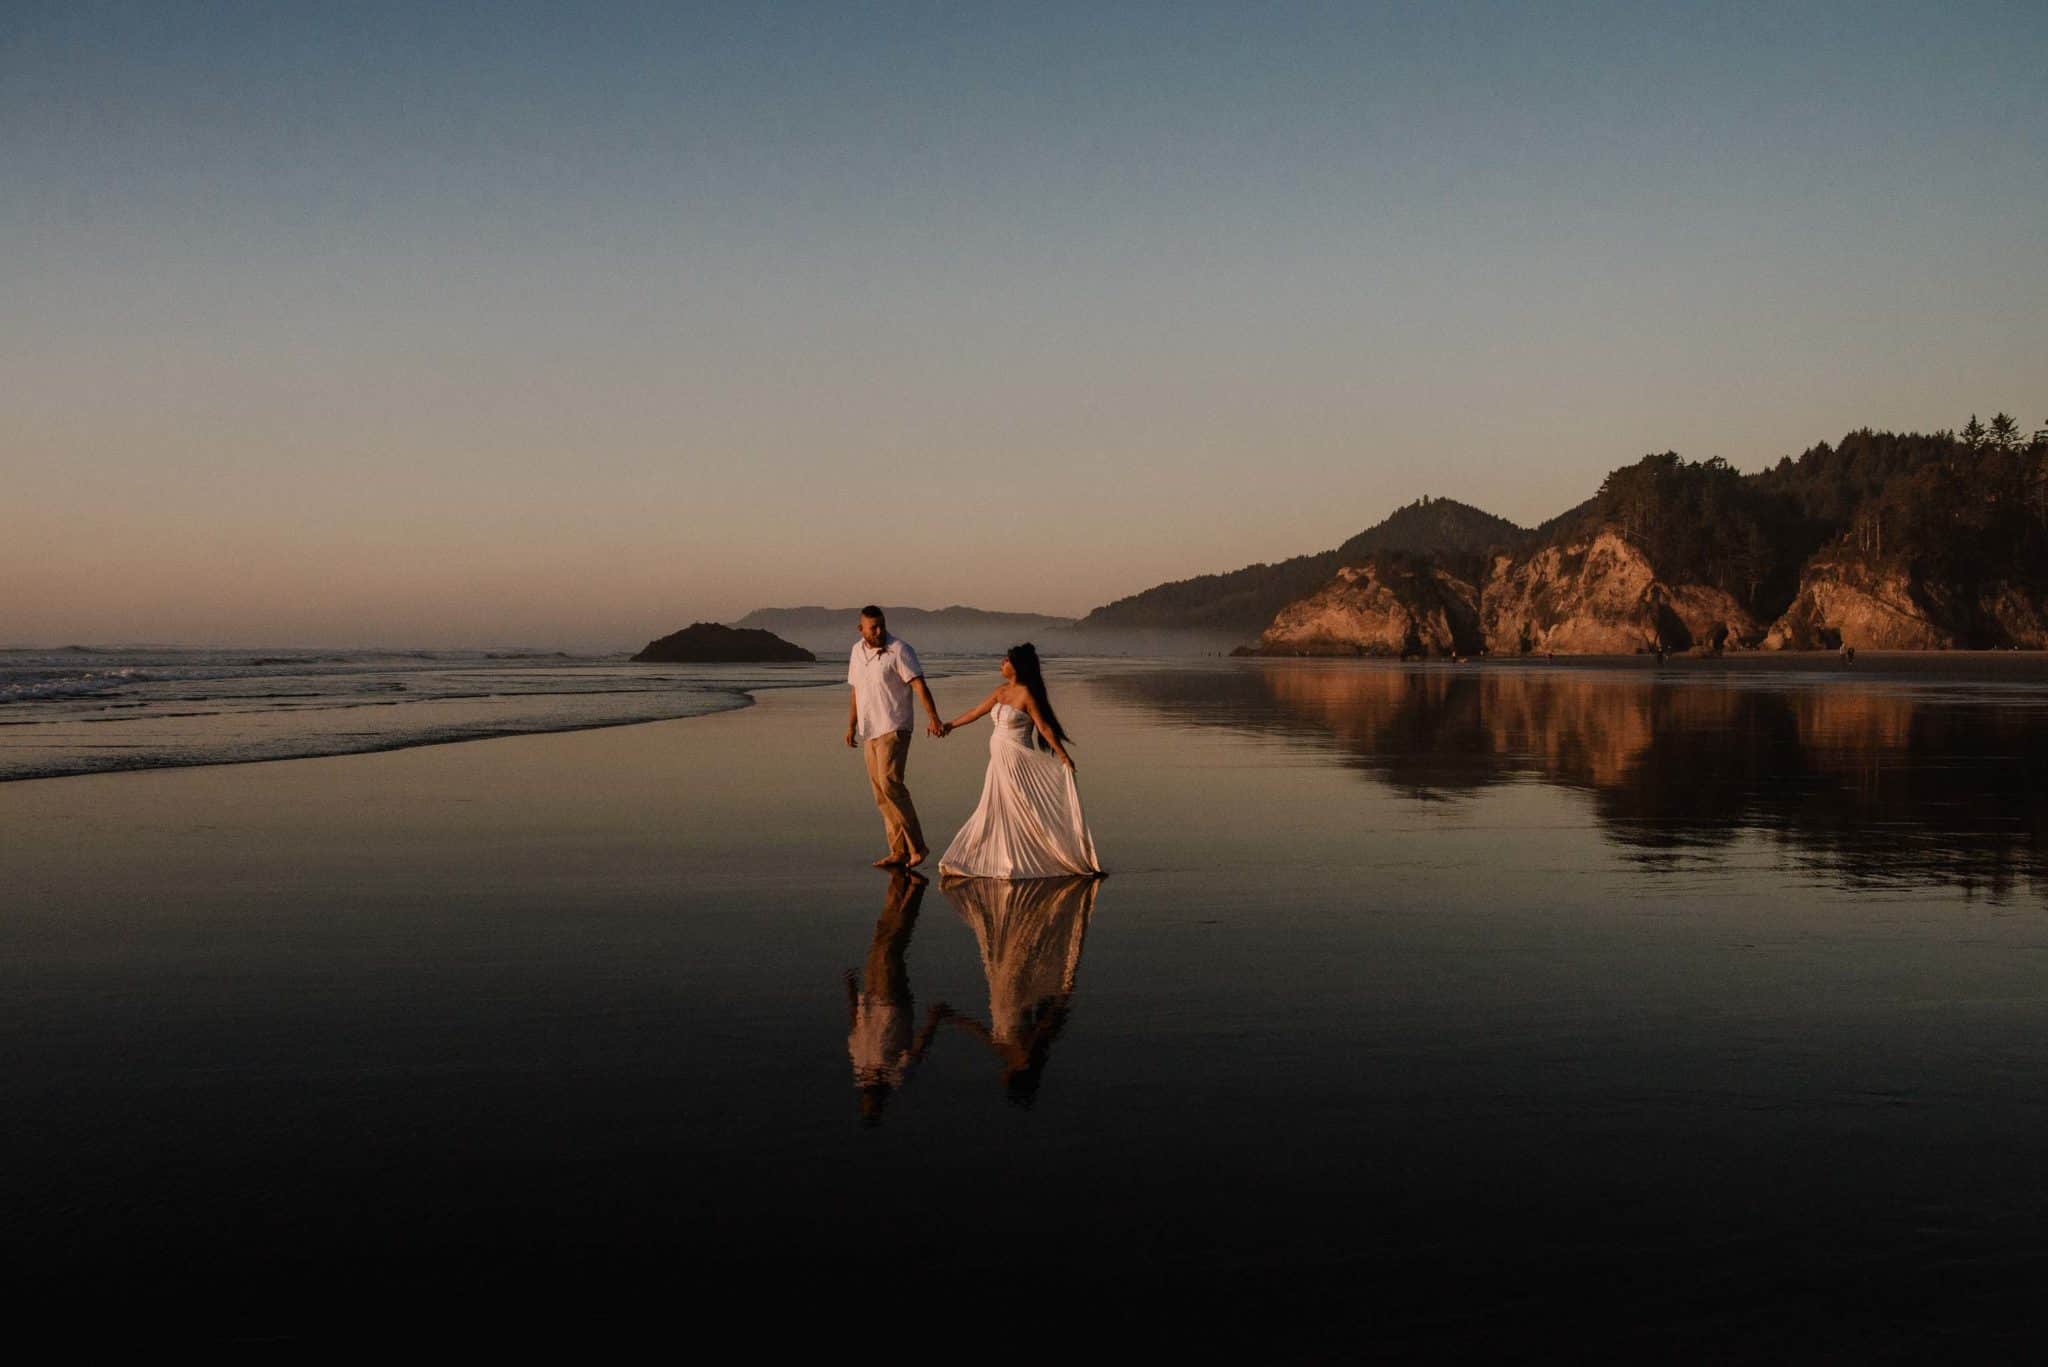 After choosing their favorite elopement locations Couple explores Hug Point after their elopement during sunset